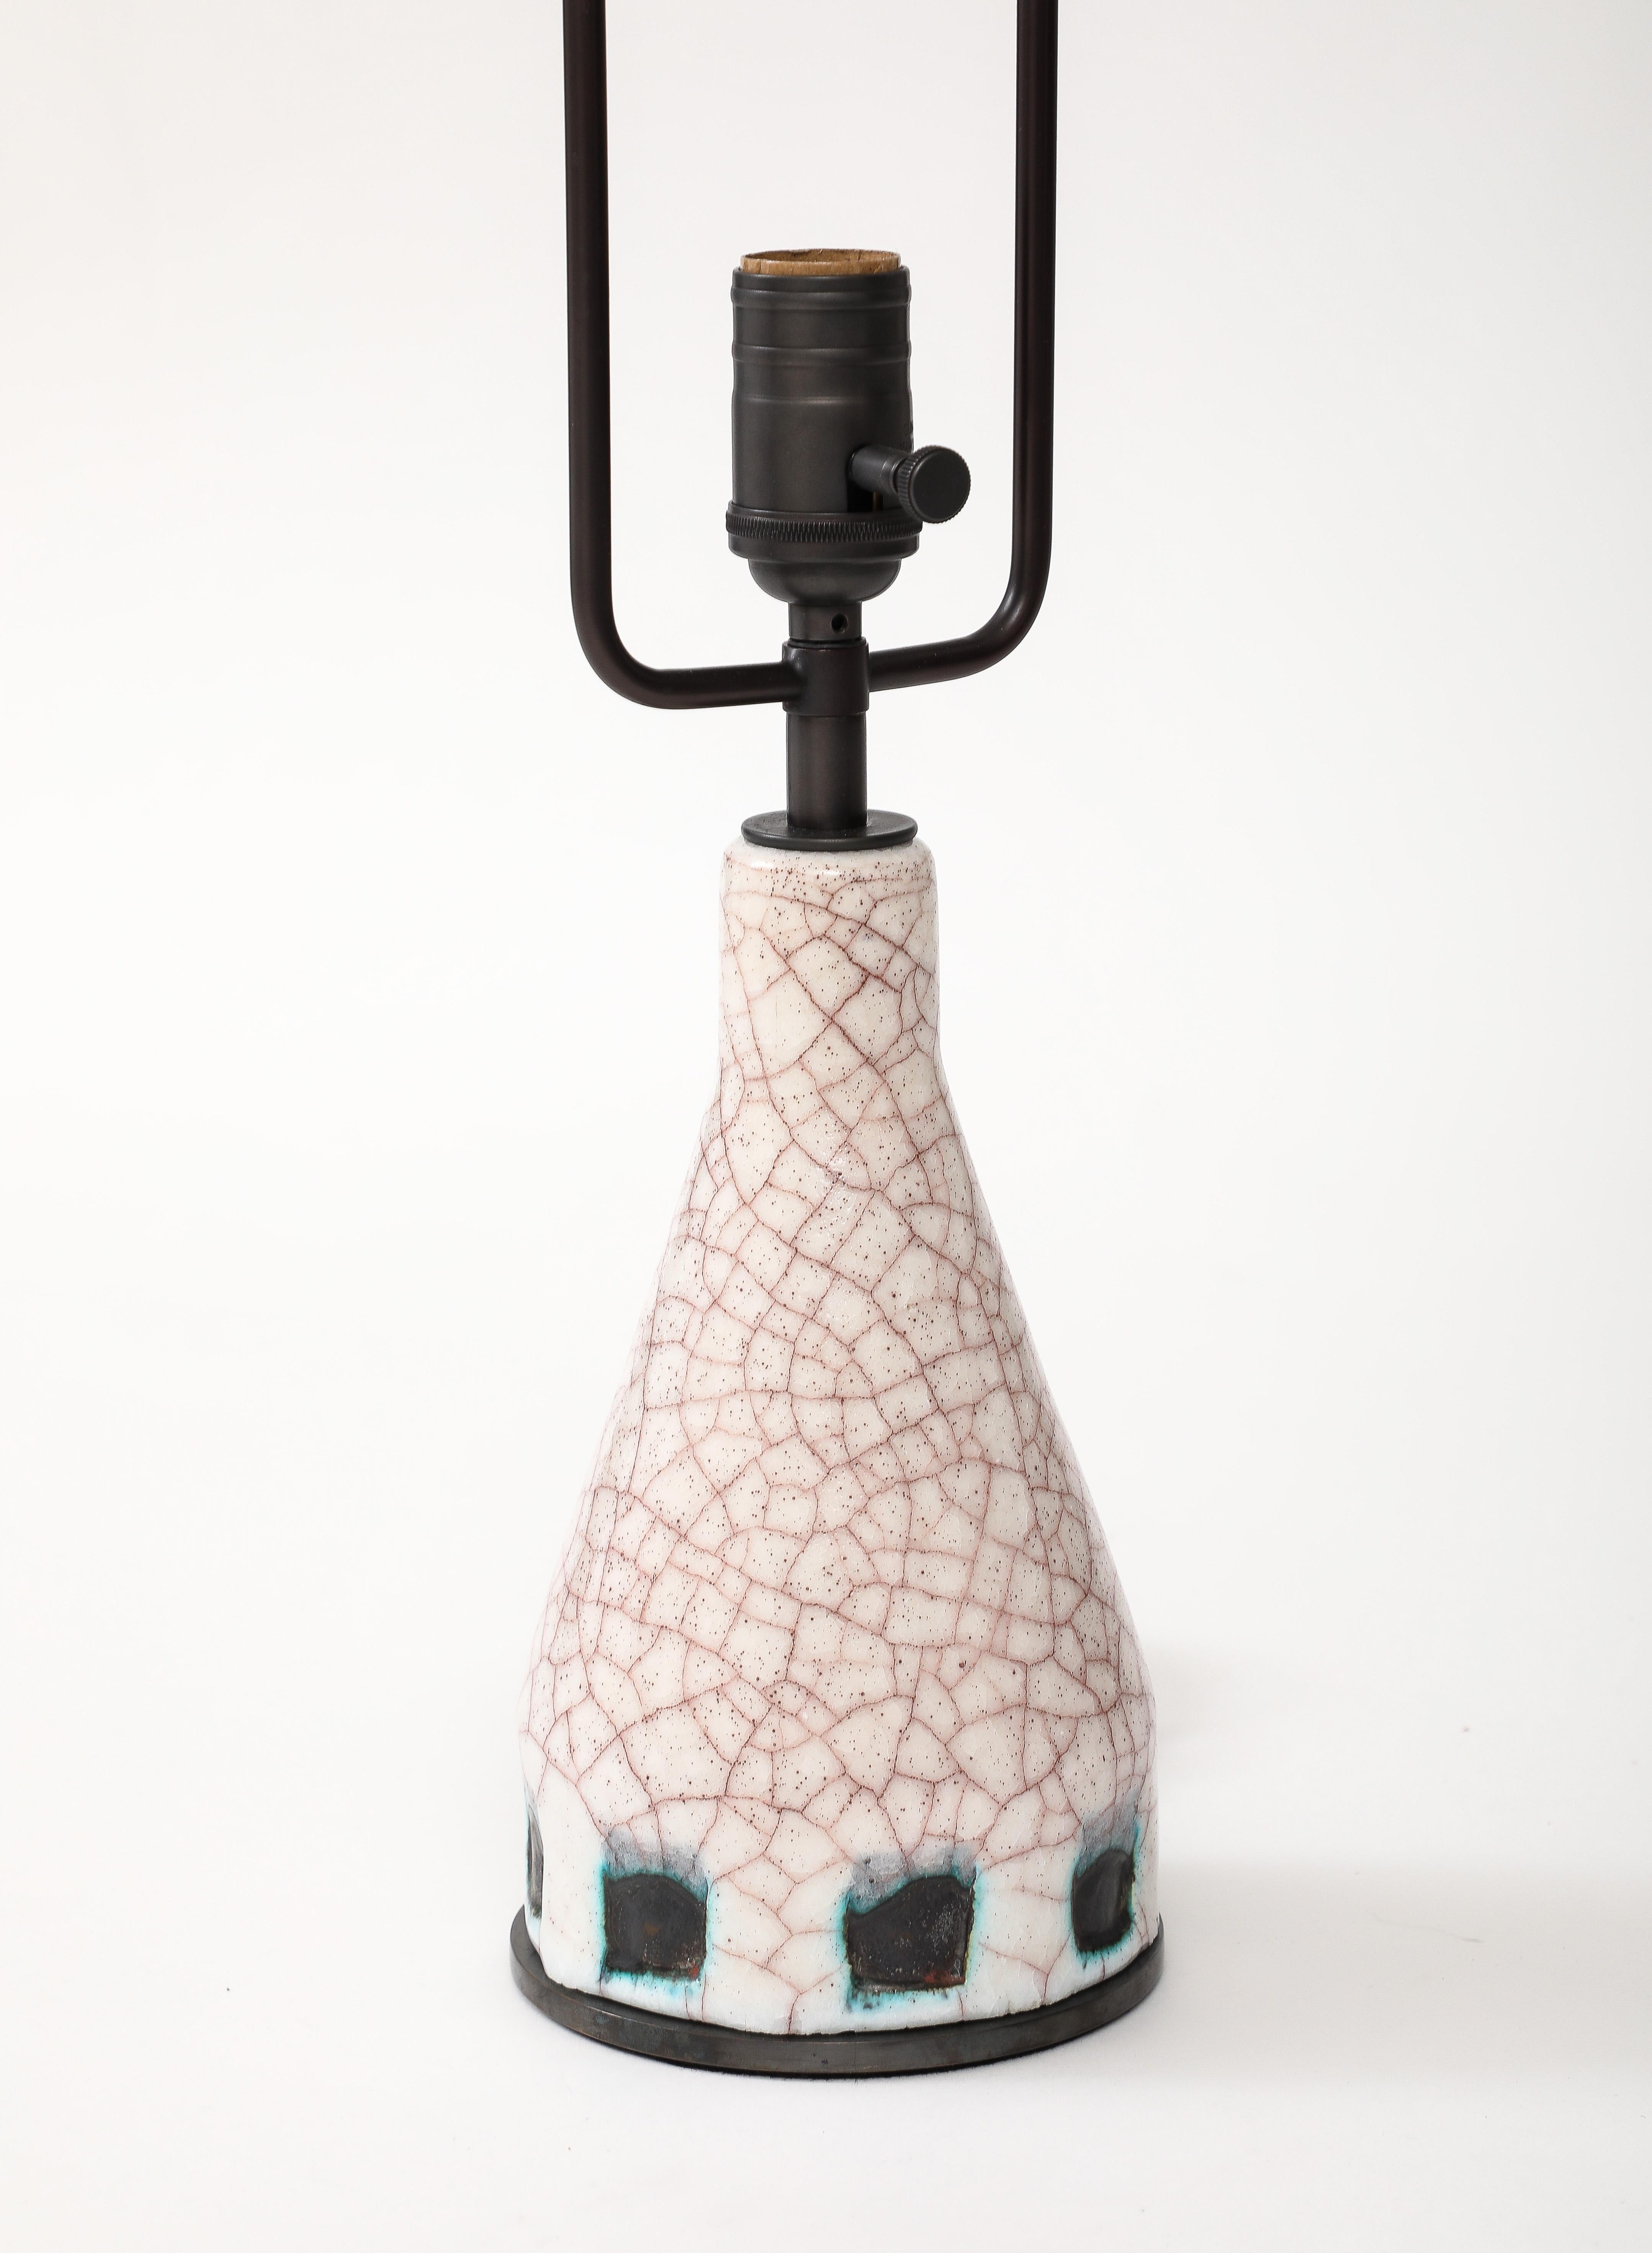 Mid-20th Century Glazed Ceramic Table Lamp Attributed to Alice Colonieu, France, c. 1960 For Sale